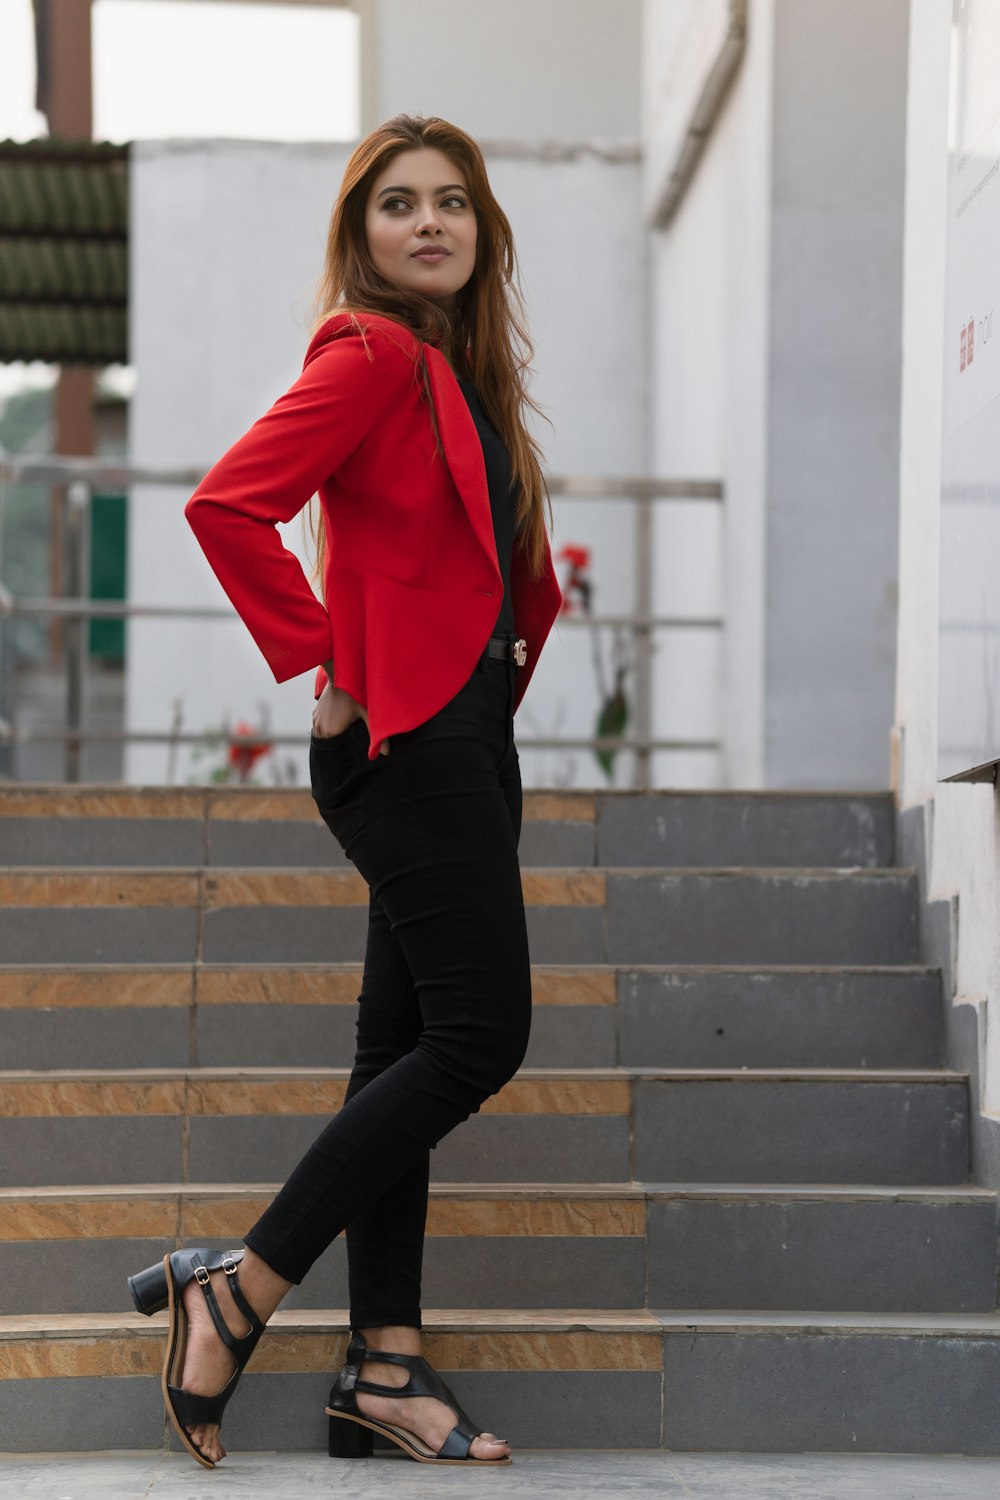 Woman in red blazer and black pants standing on gray concrete